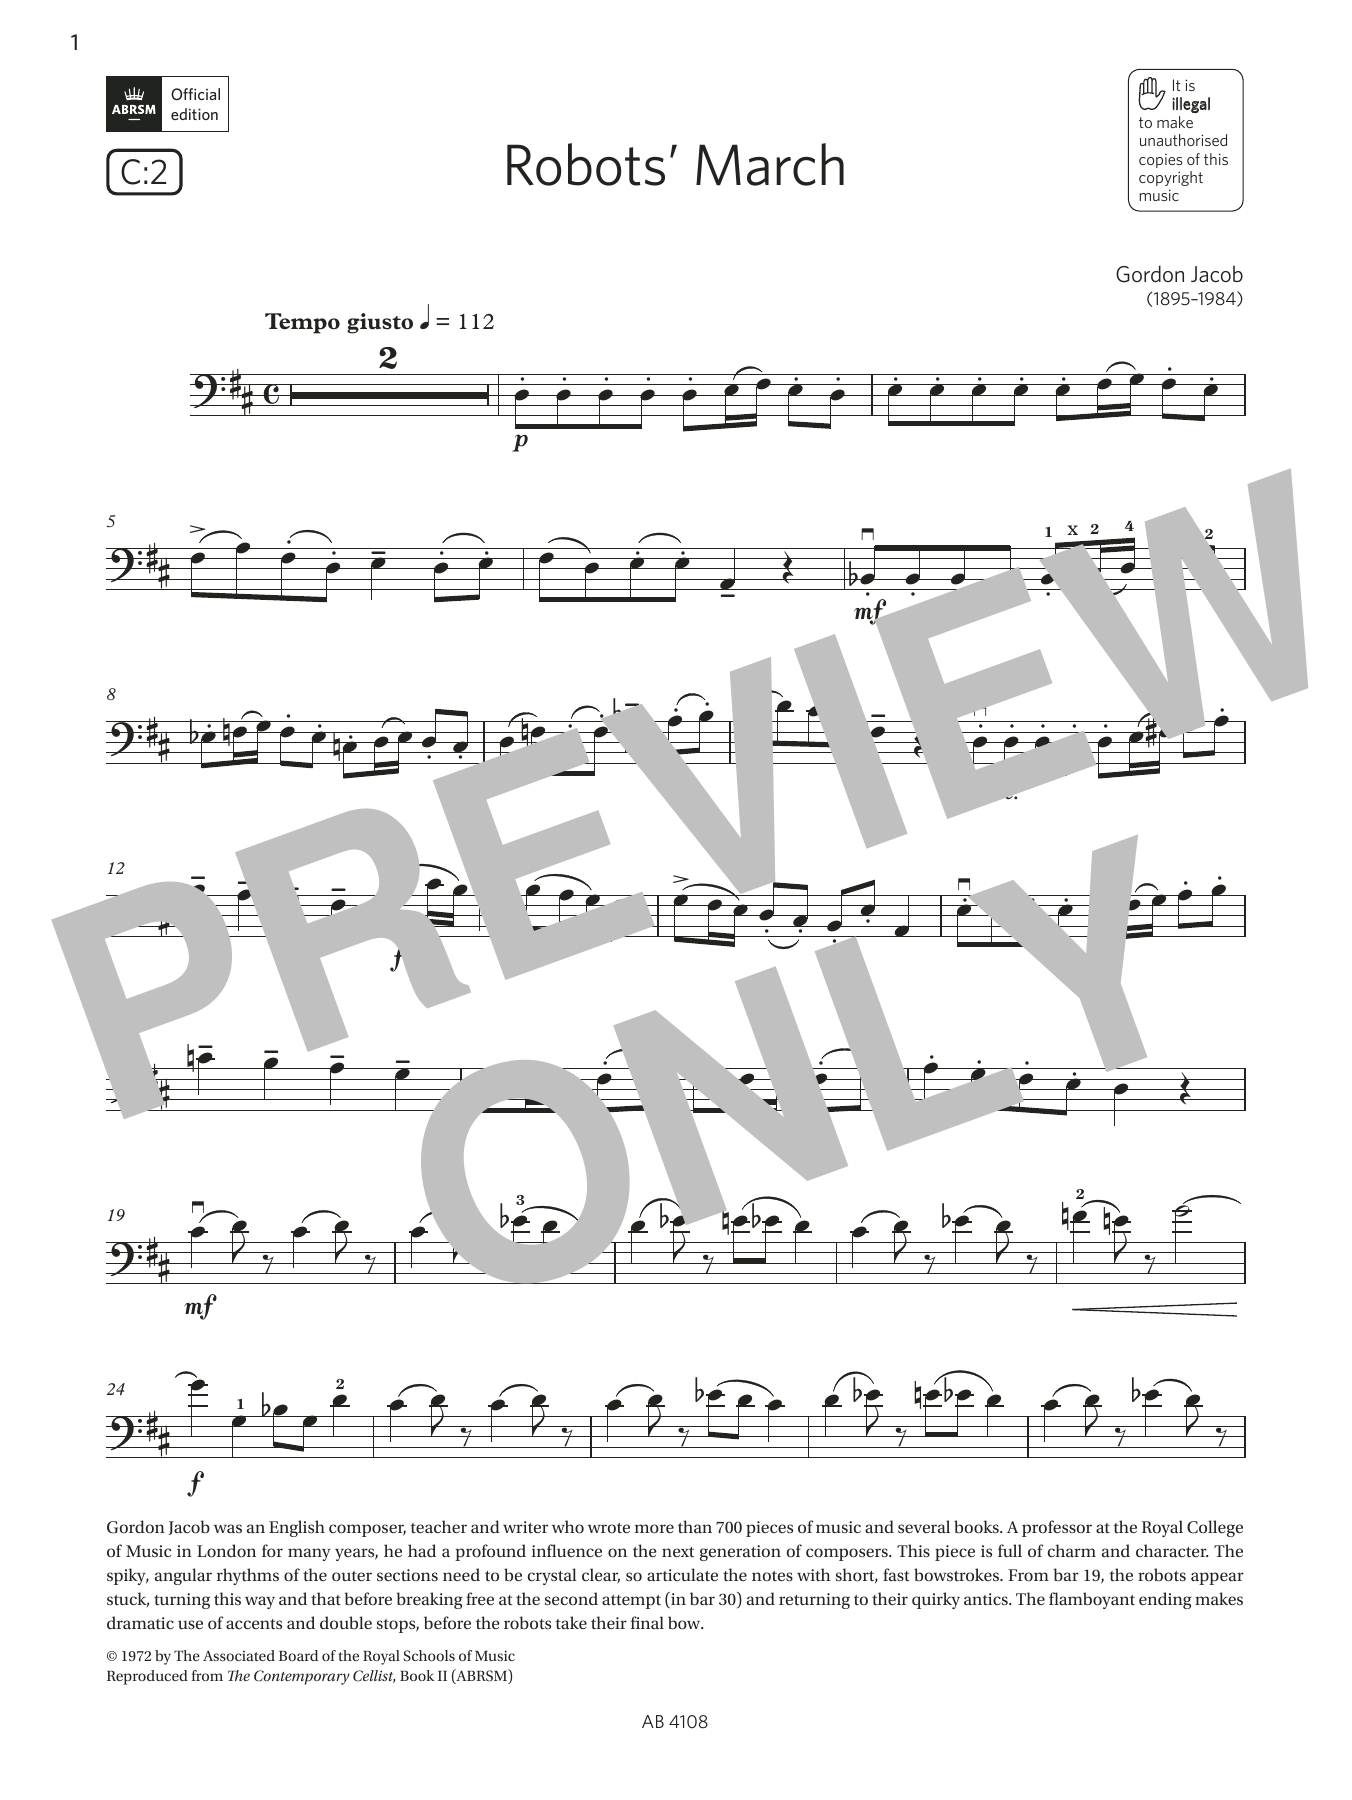 Download Gordon Jacob Robots' March (Grade 5, C2, from the AB Sheet Music